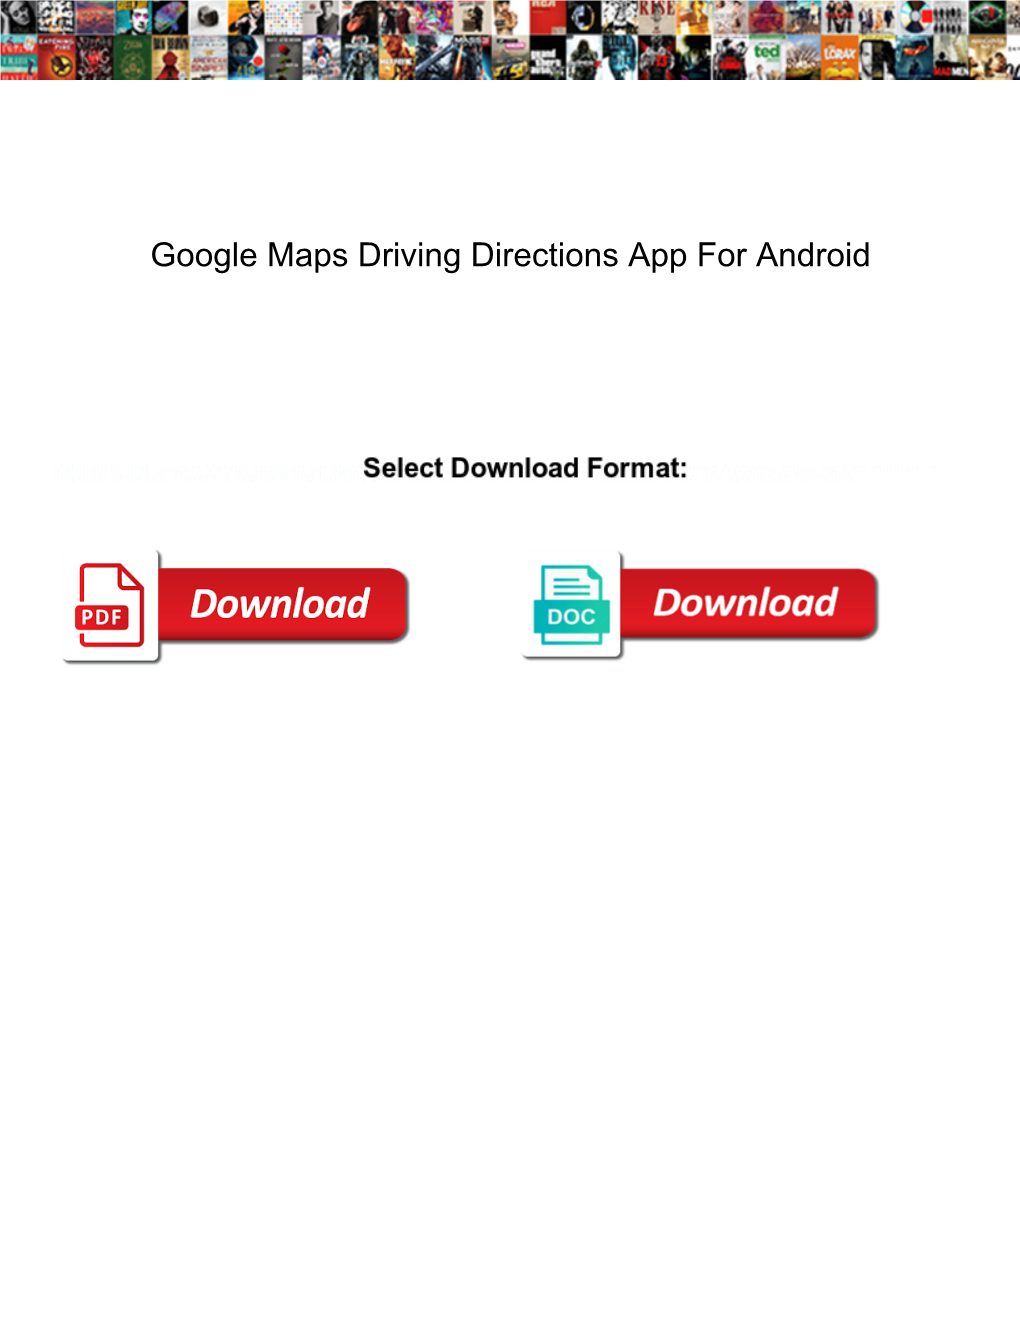 Google Maps Driving Directions App for Android